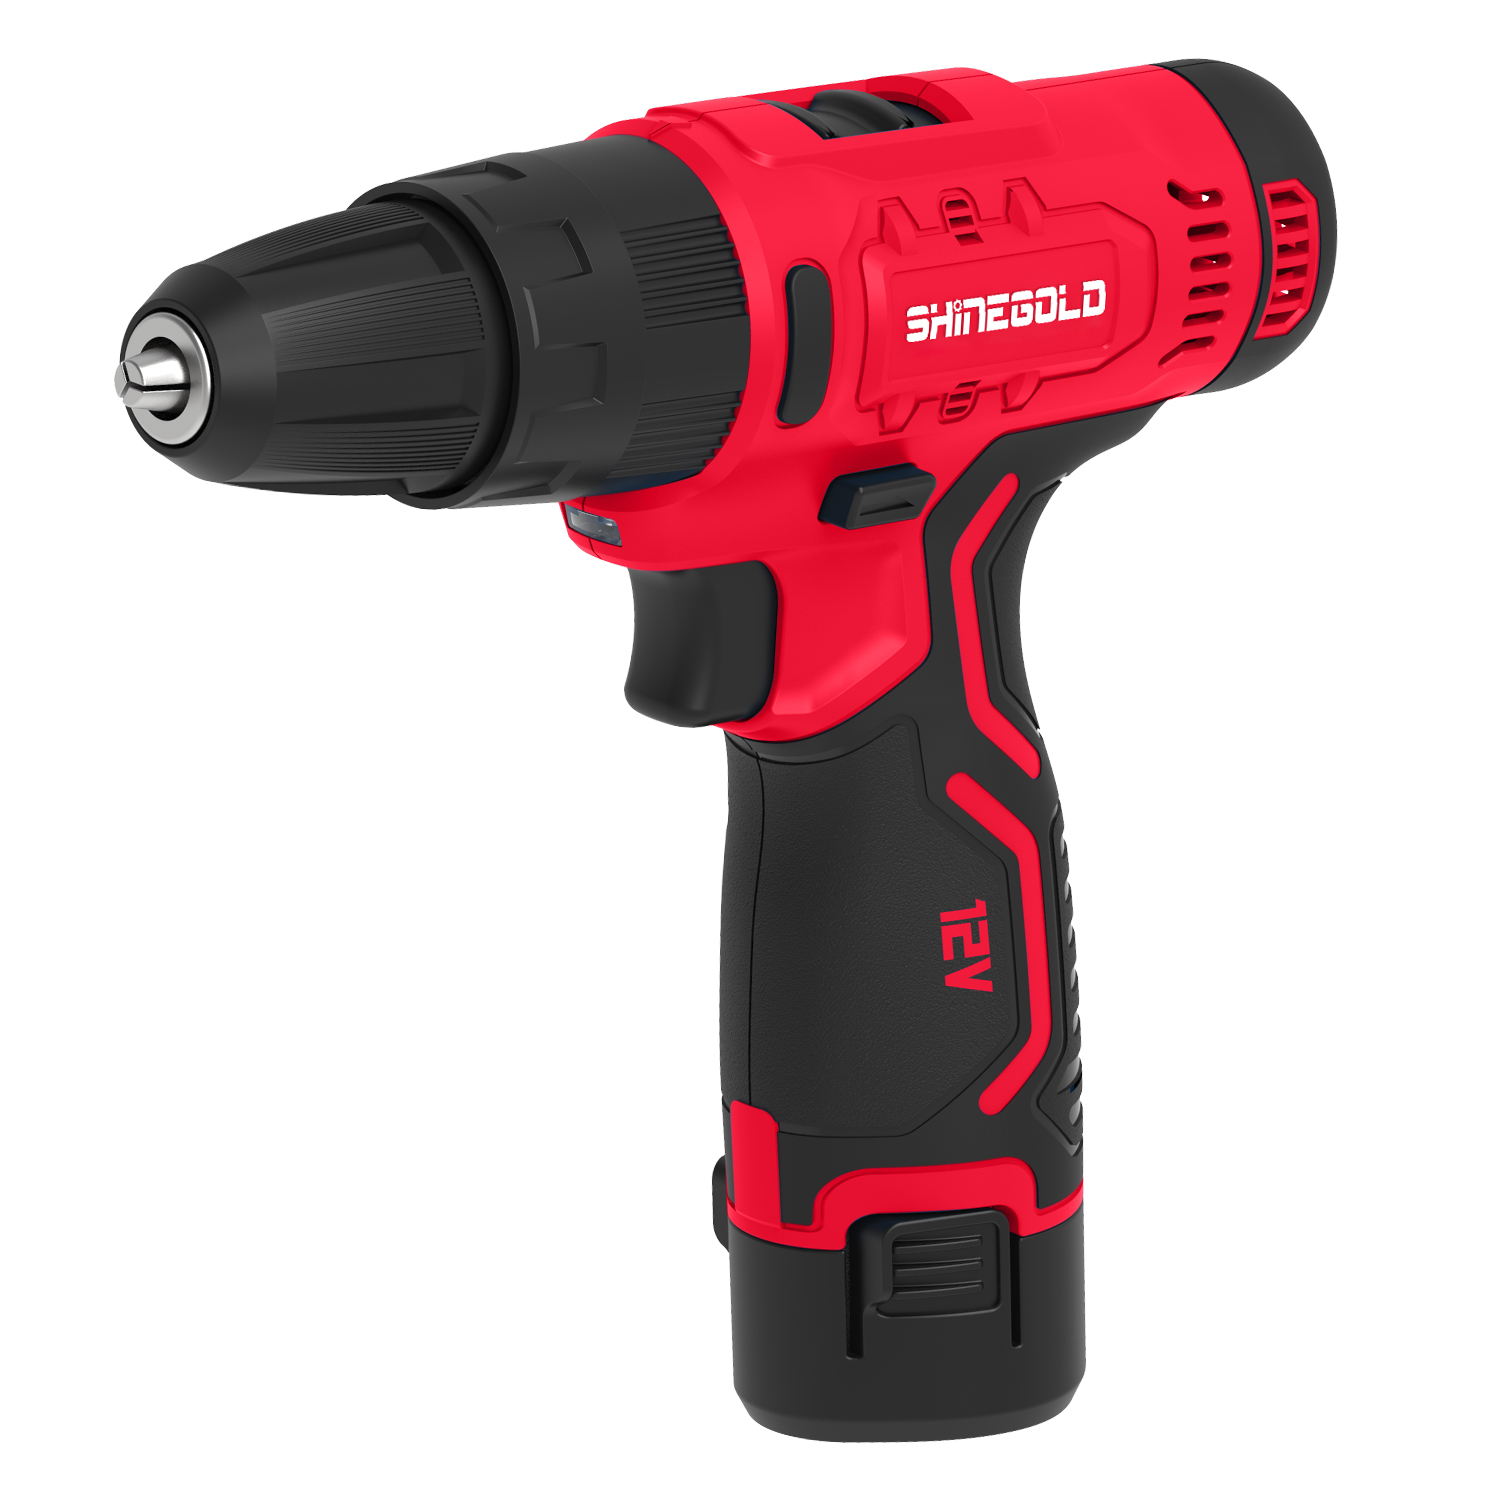 What is an electric impact drill?